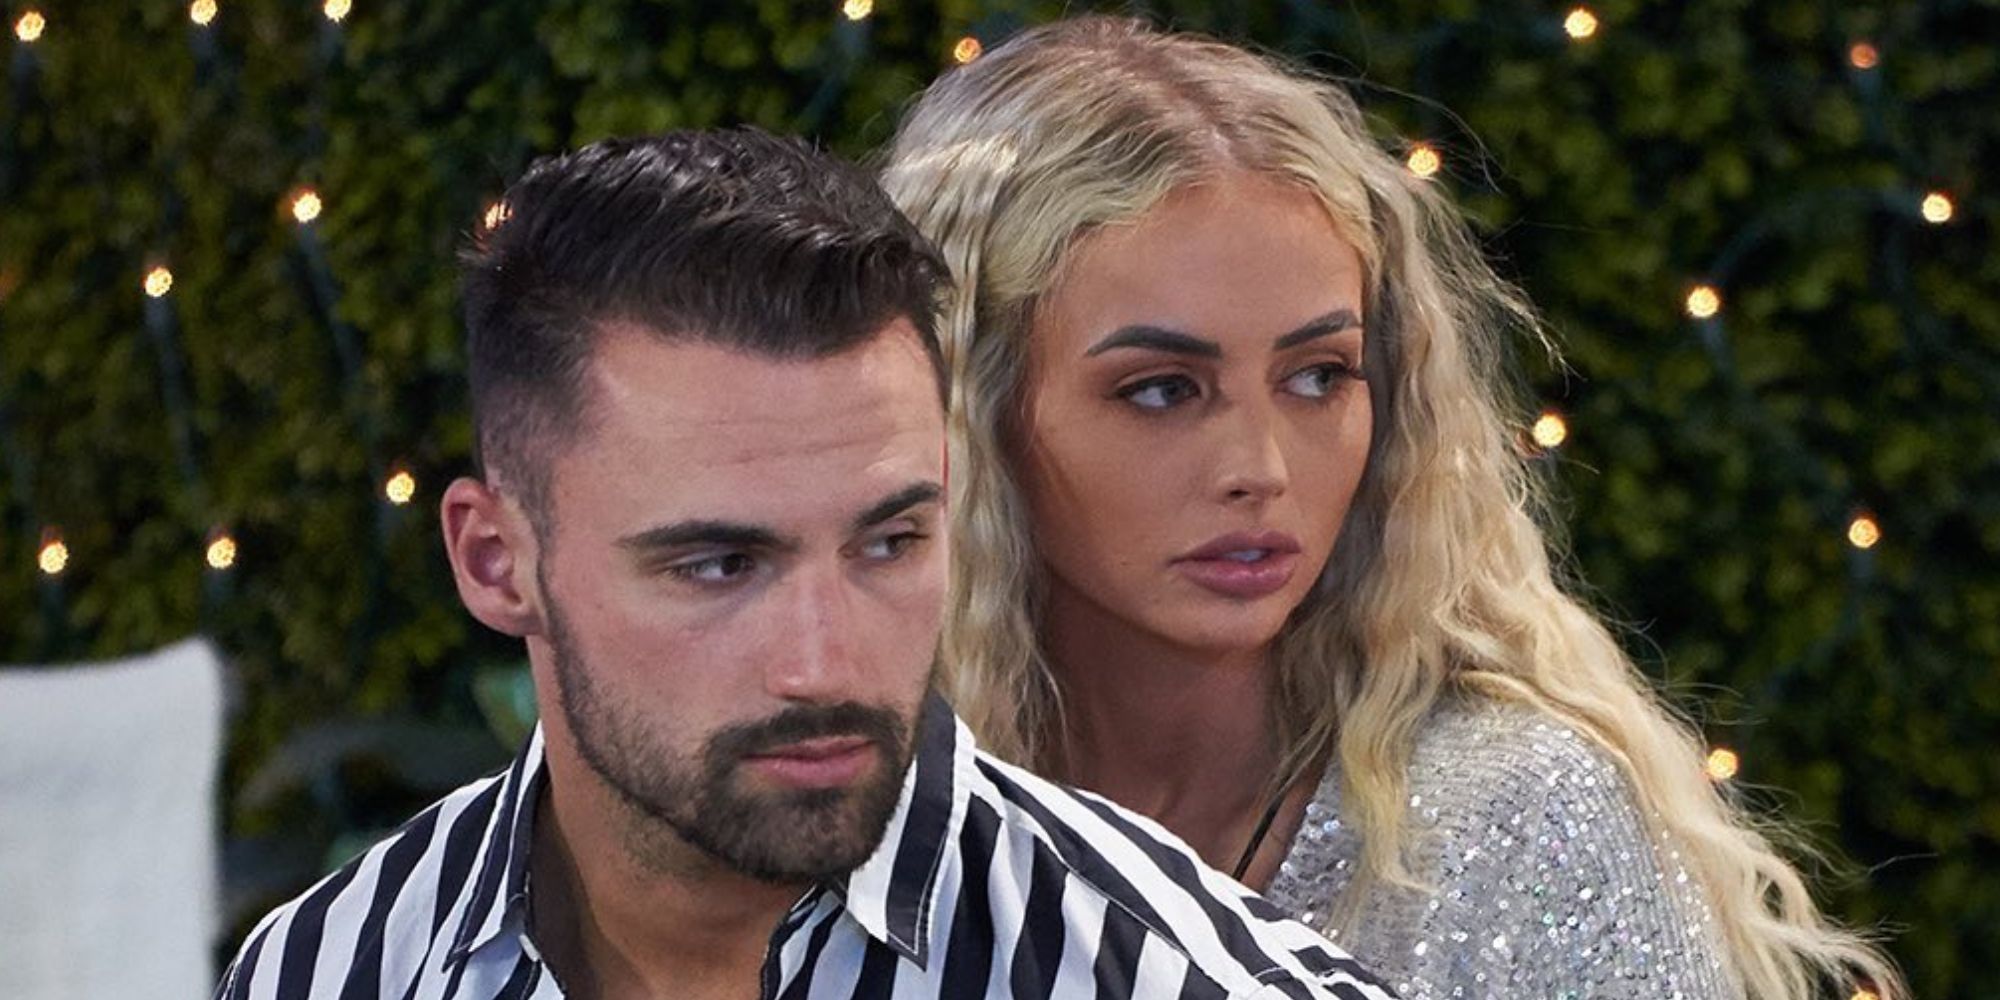 Love Island USA What Mackenzie Dipman & Connor Trott Are Up To After